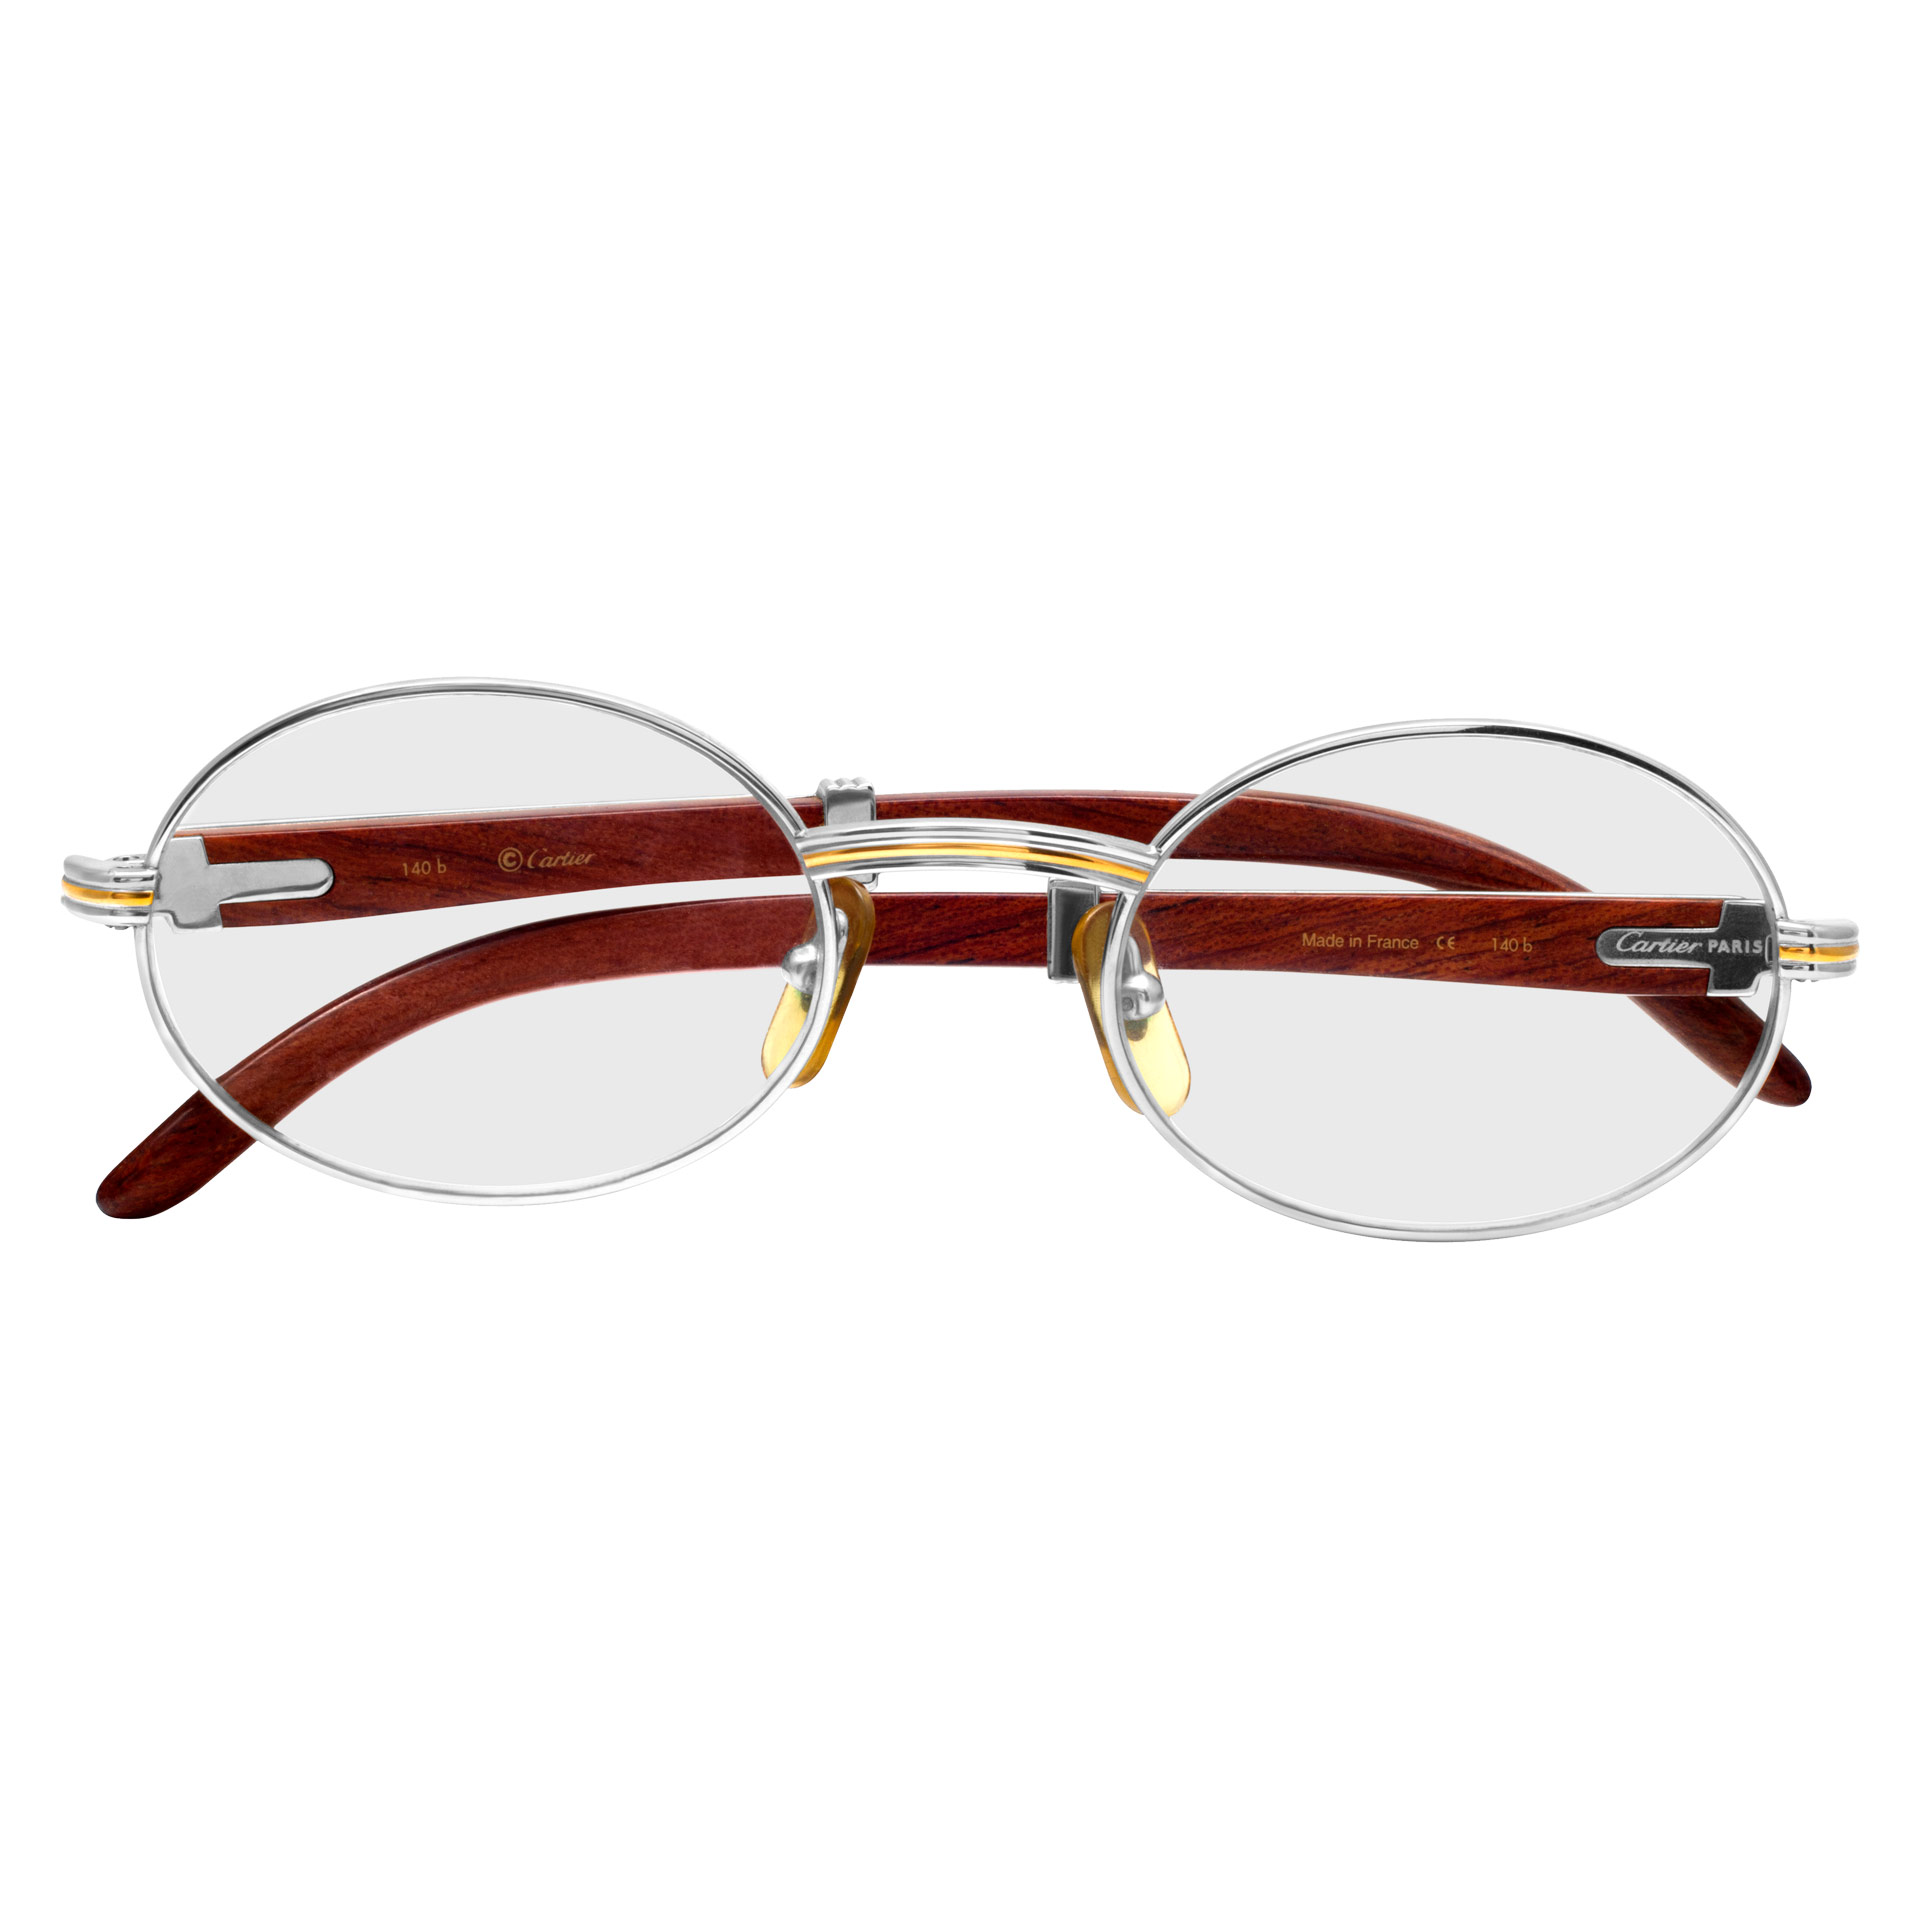 Cartier Trinity glasses with wood stems image 2